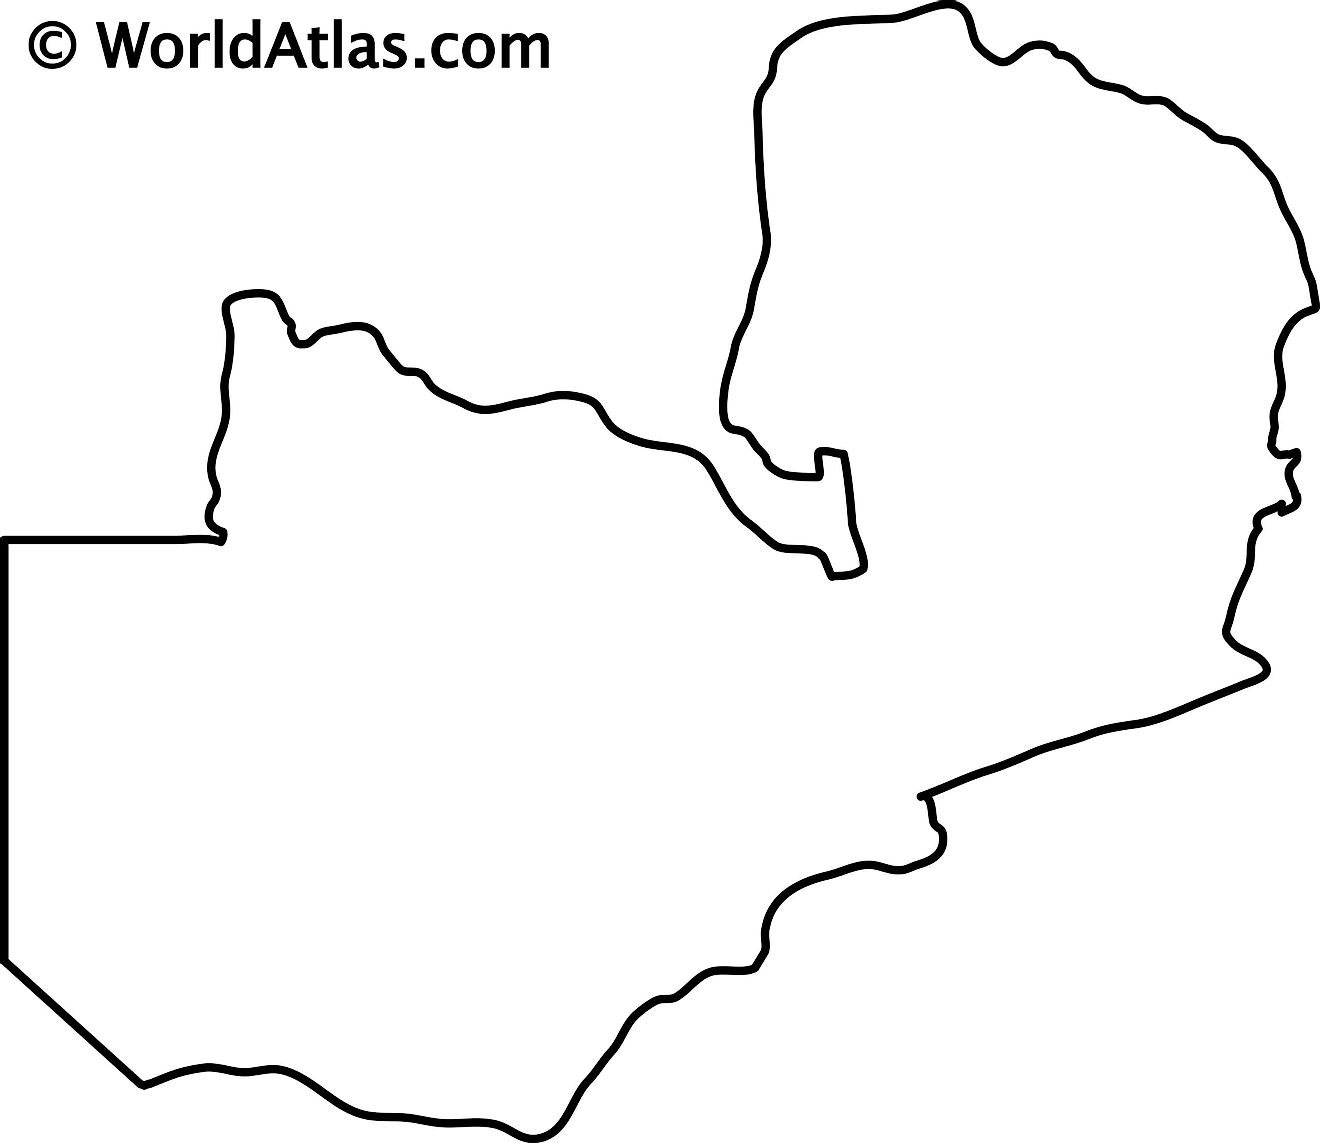 Blank Outline Map of Zambia